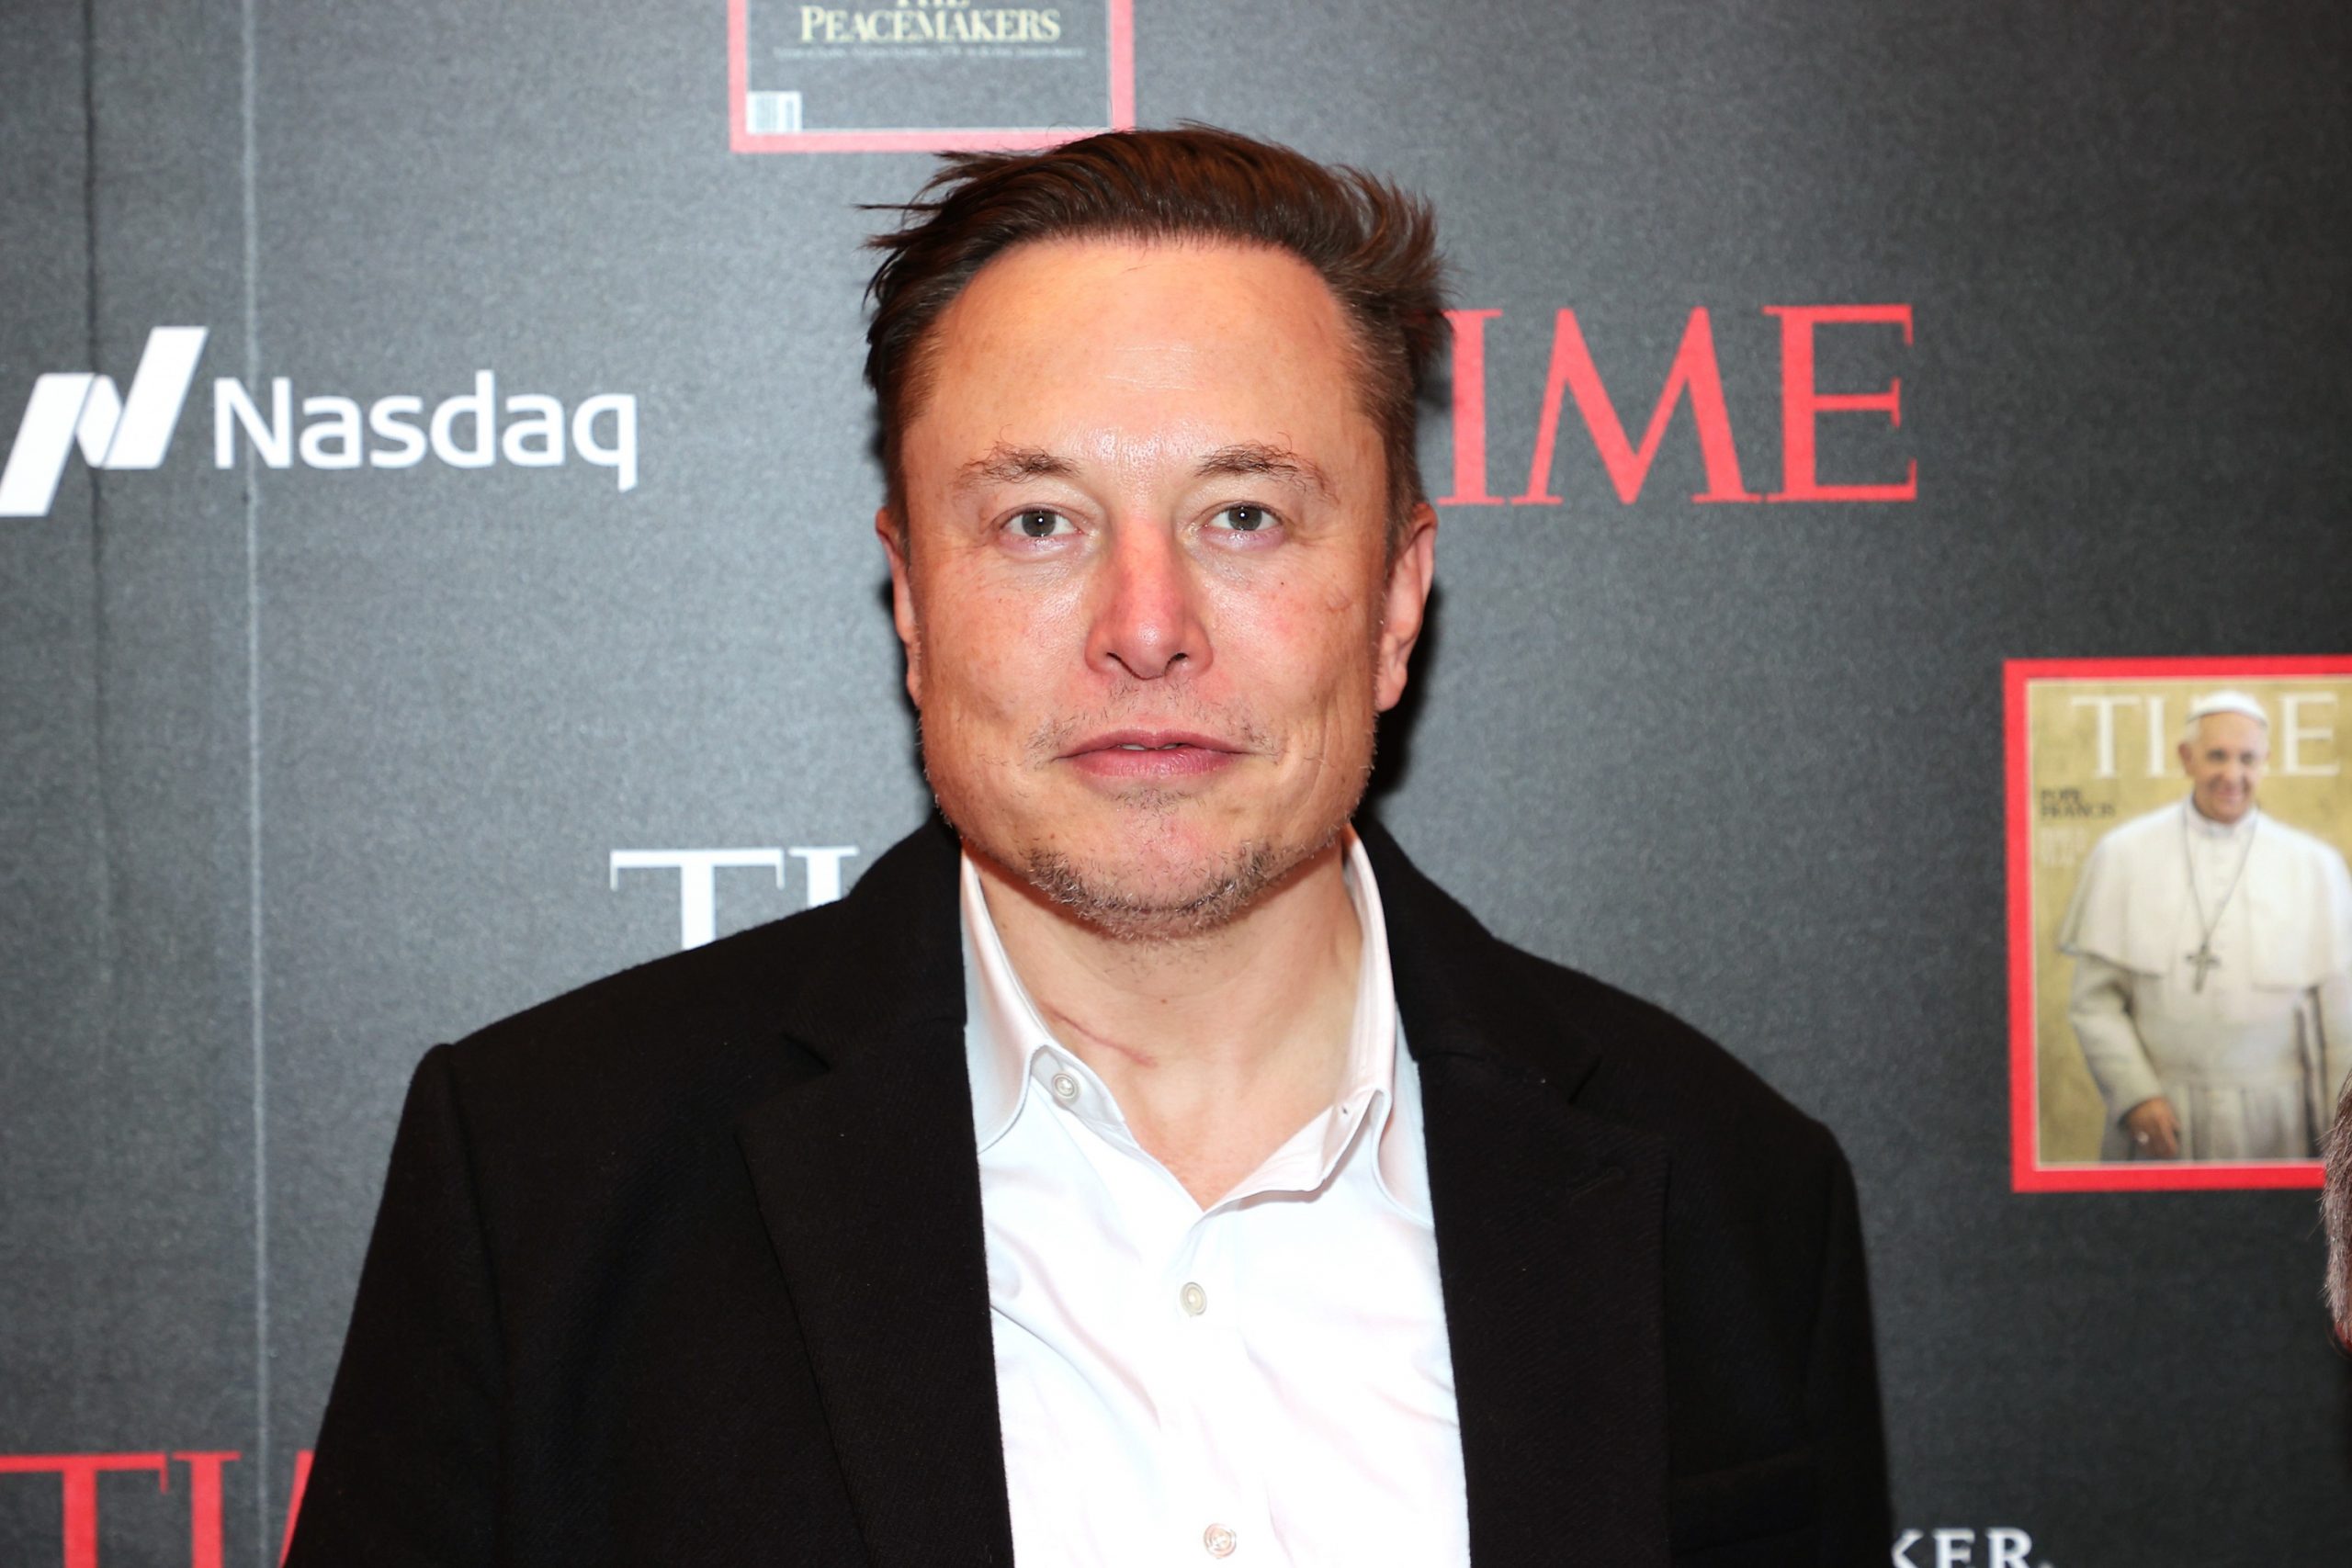 Tesla founder Elon Musk at a TIME gala event